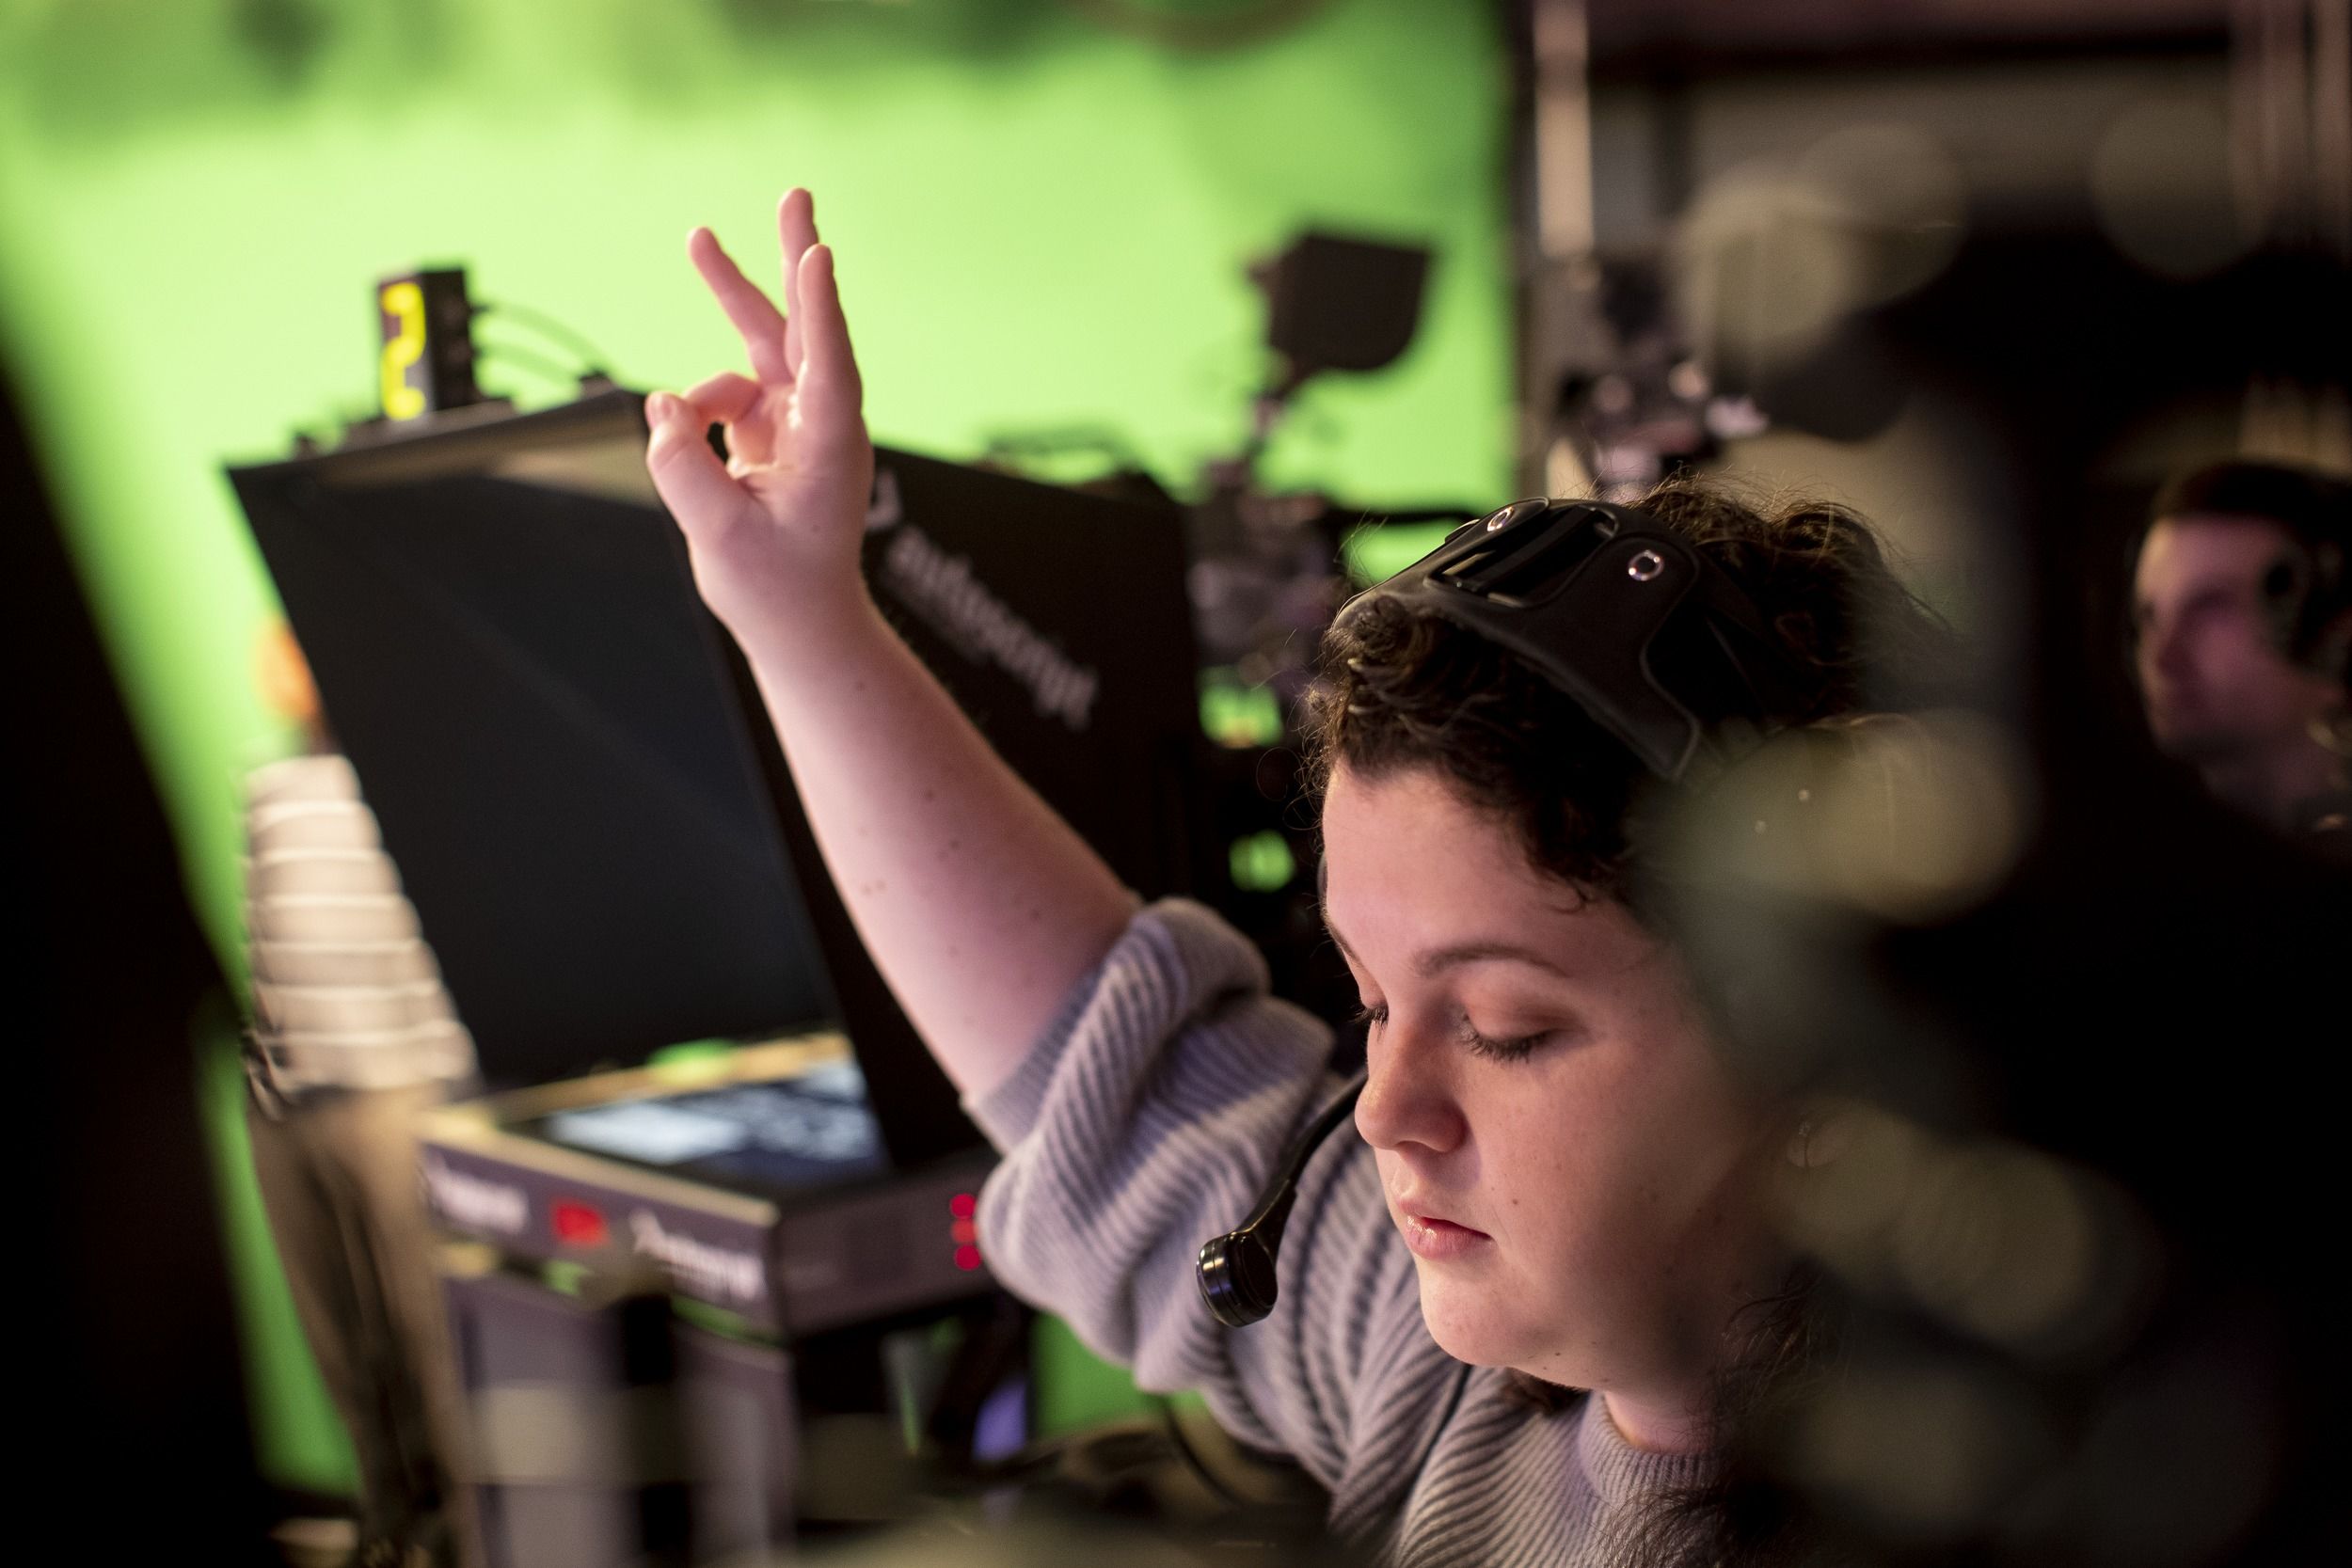 A student with three fingers raised in the air to let people know when to begin shooting in a broadcasting studio.